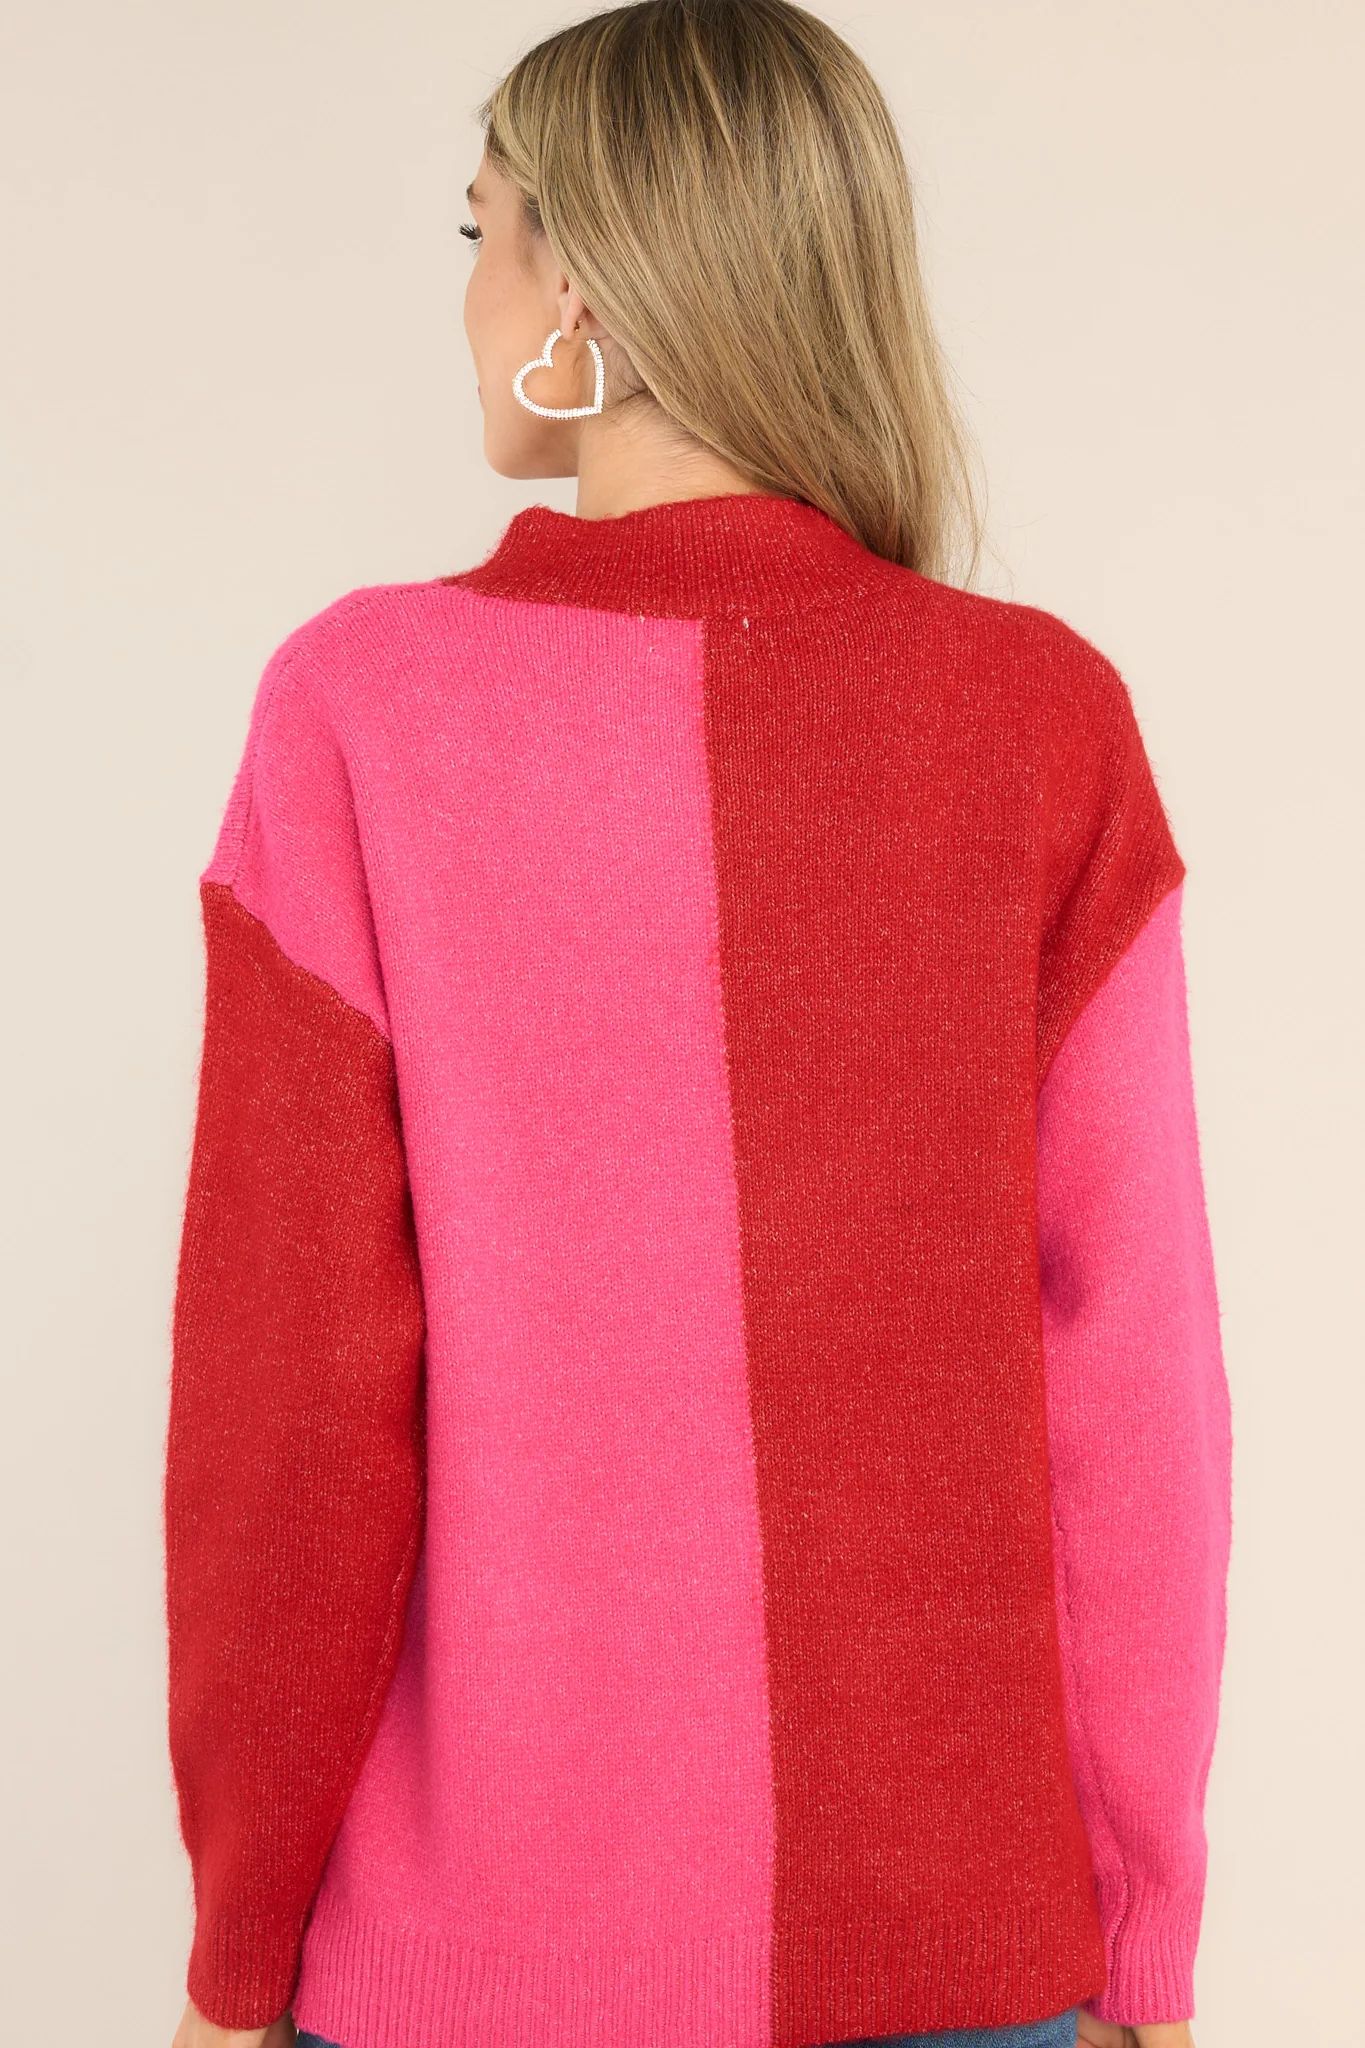 You Wouldn't Get It Hot Pink Two Toned Sweater | Red Dress 